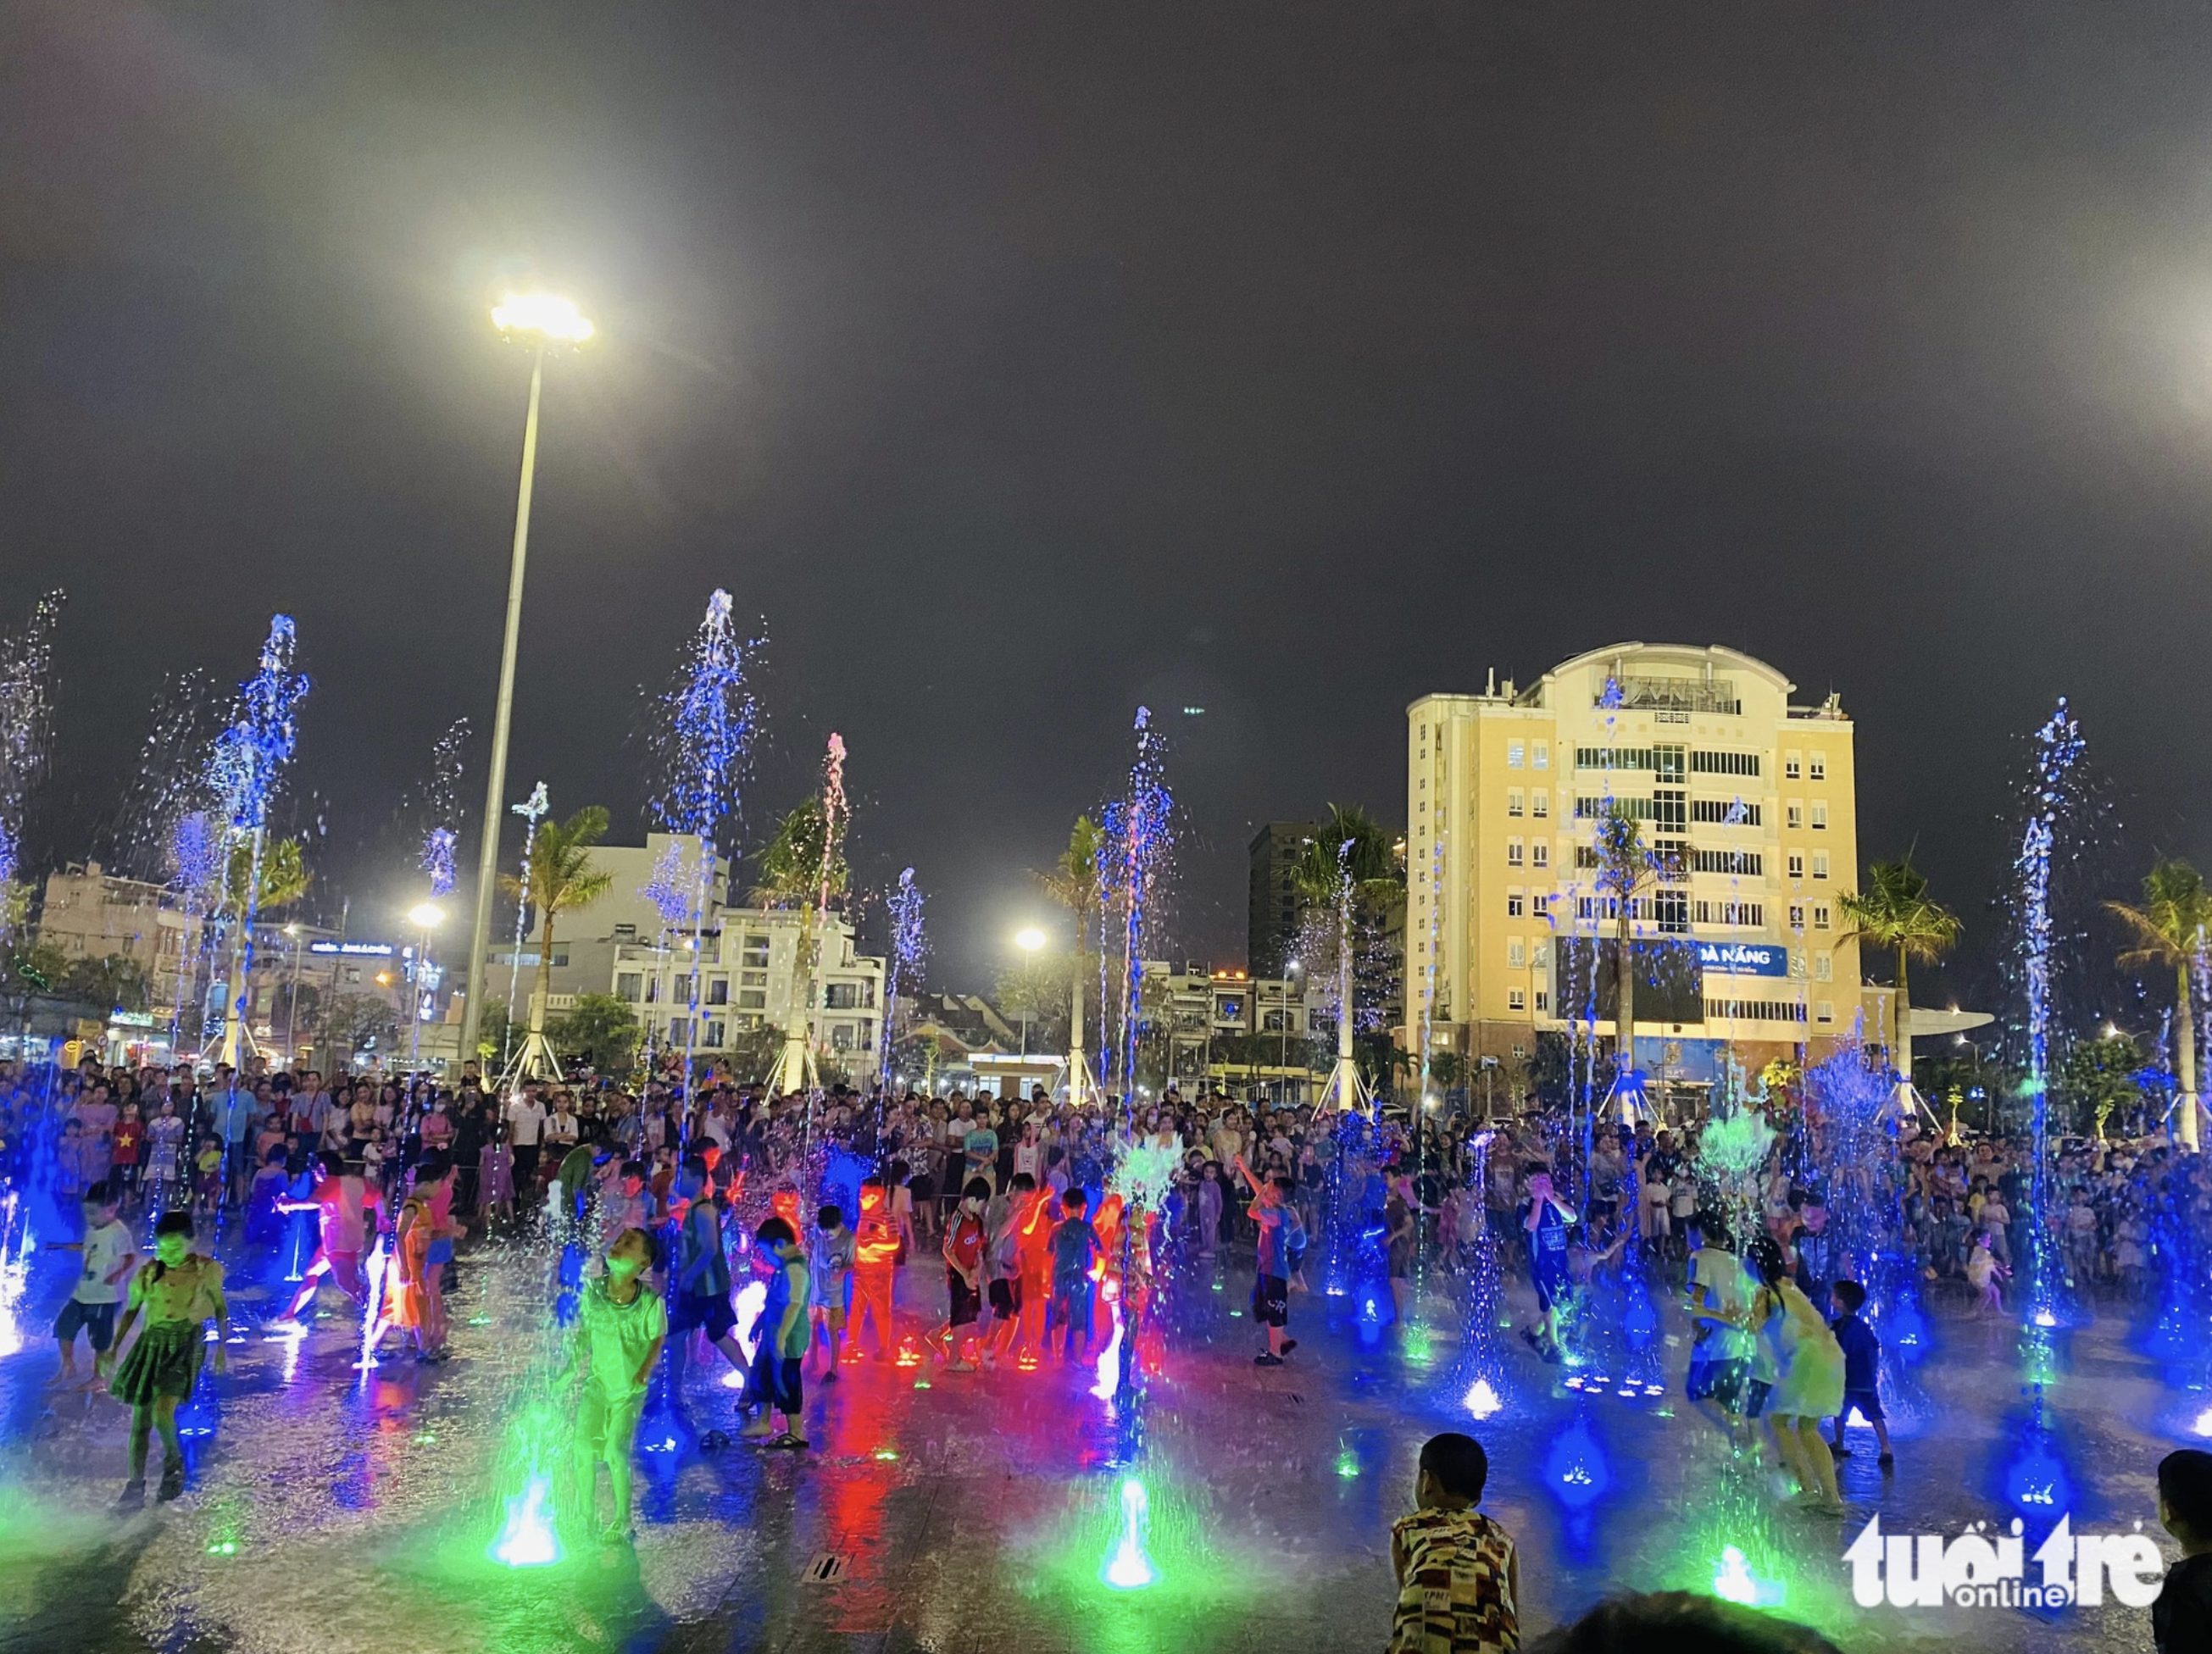 A musical fountain at the March 29 Square in Da Nang City, central Vietnam attracts crowds of adults and children. Photo: Sang Nguyen / Tuoi Tre